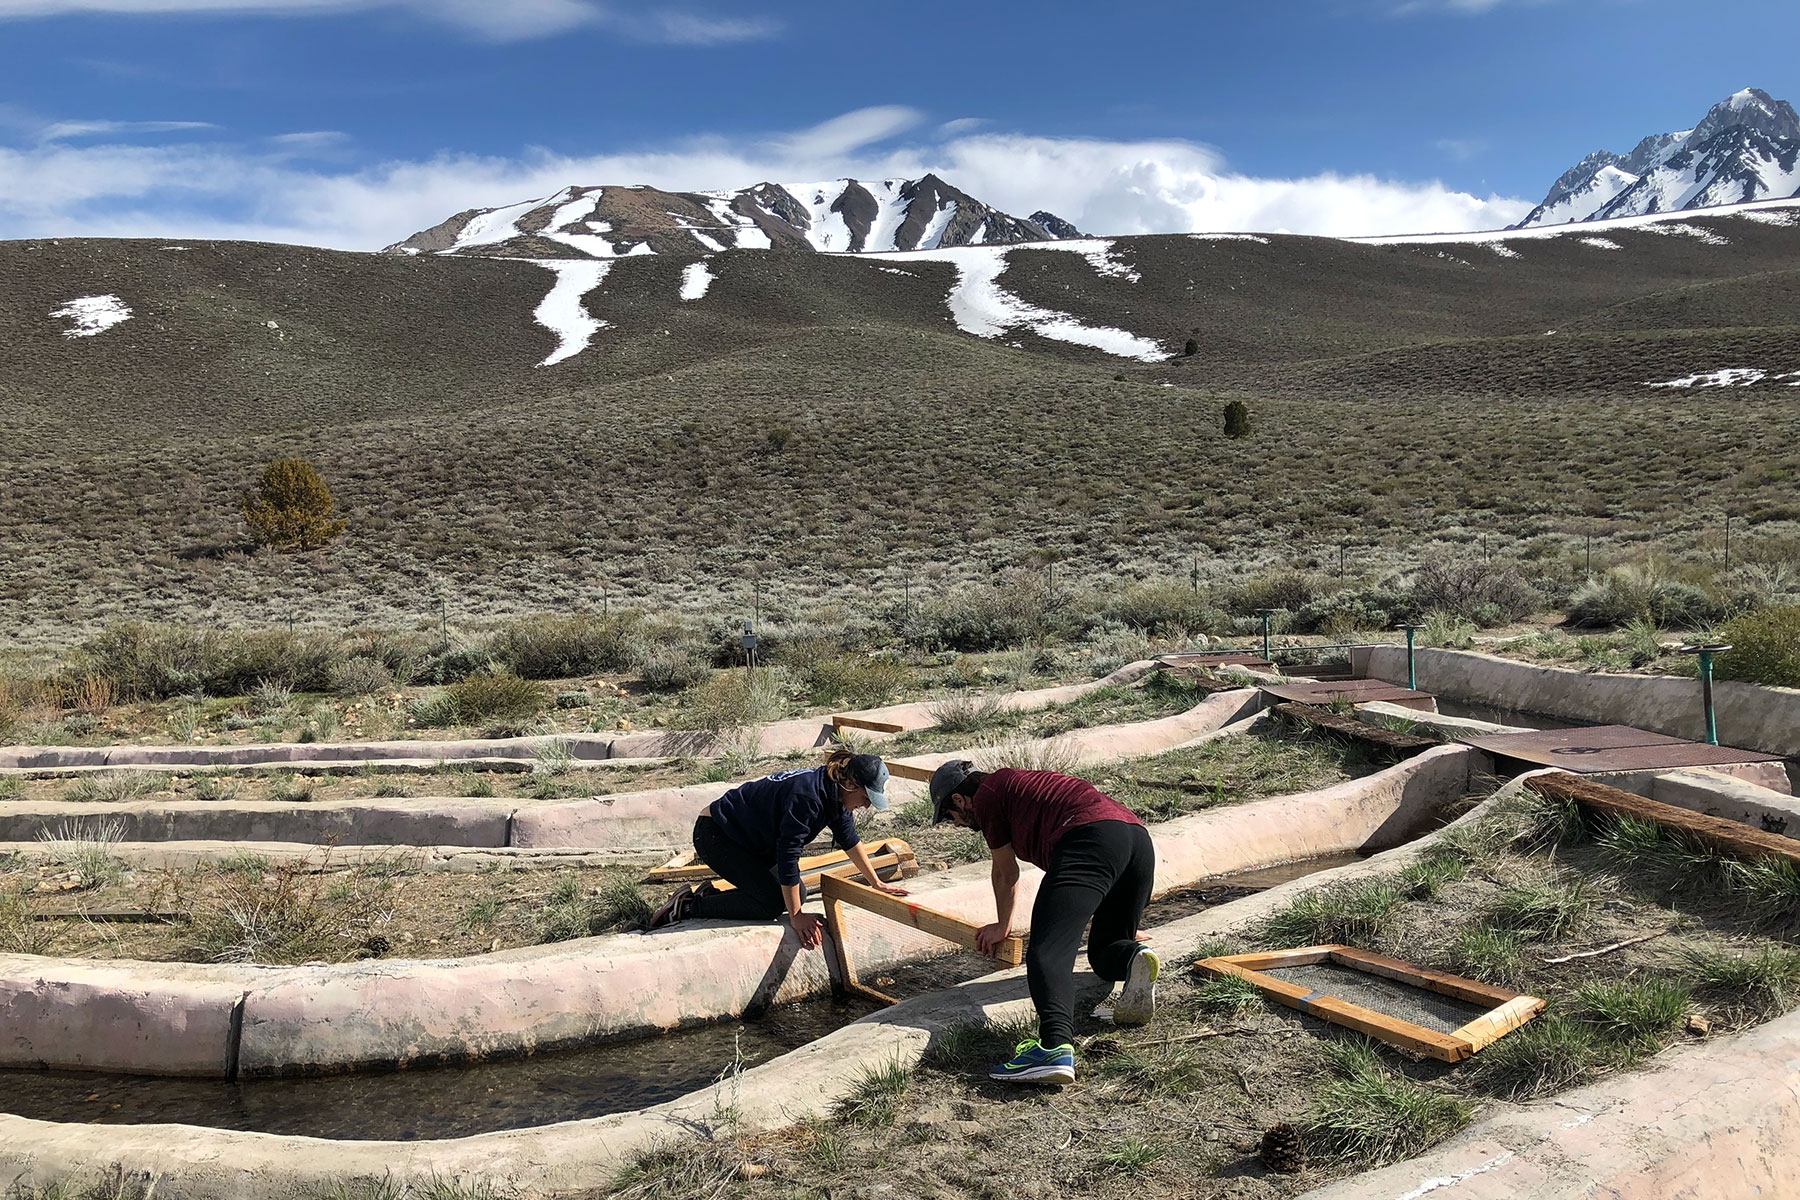 Water flows through a series of concrete channels that zig-zag across a dry, grassy mountainside. In the foreground, Two researchers are placing a wood-framed mesh grid into one of the channels to prevent fish from entering the experiment. Snowy mountain peaks rise up in the background.